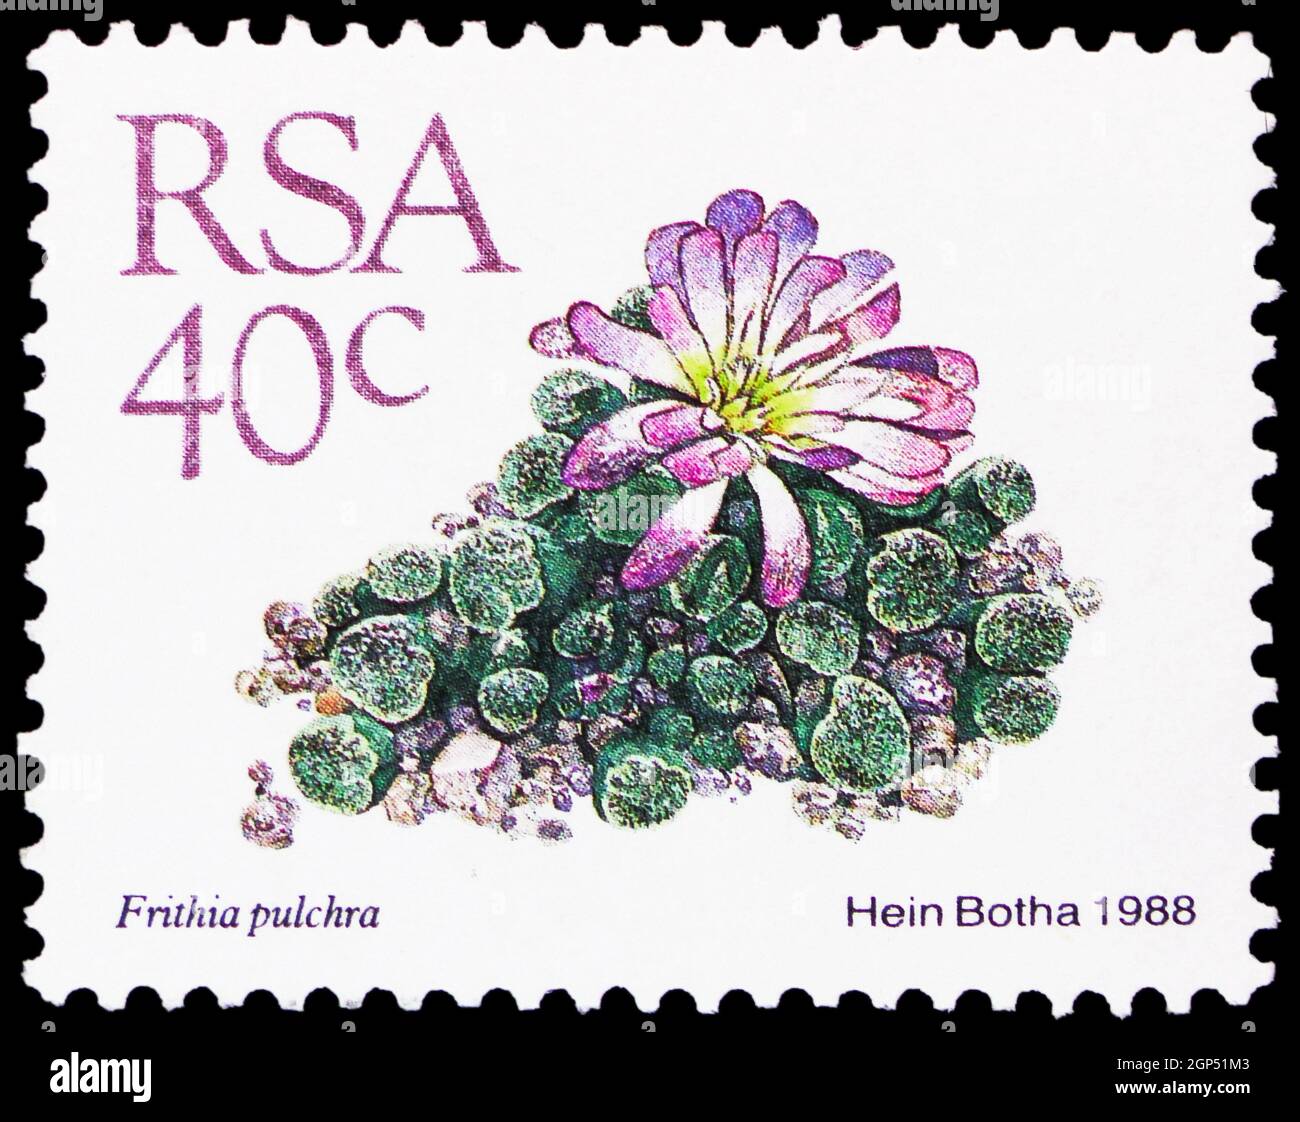 MOSCOW, RUSSIA - AUGUST 5, 2021: Postage stamp printed in South Africa shows Frithia Pulchra, Definitive Issue - Succulents serie, circa 1988 Stock Photo